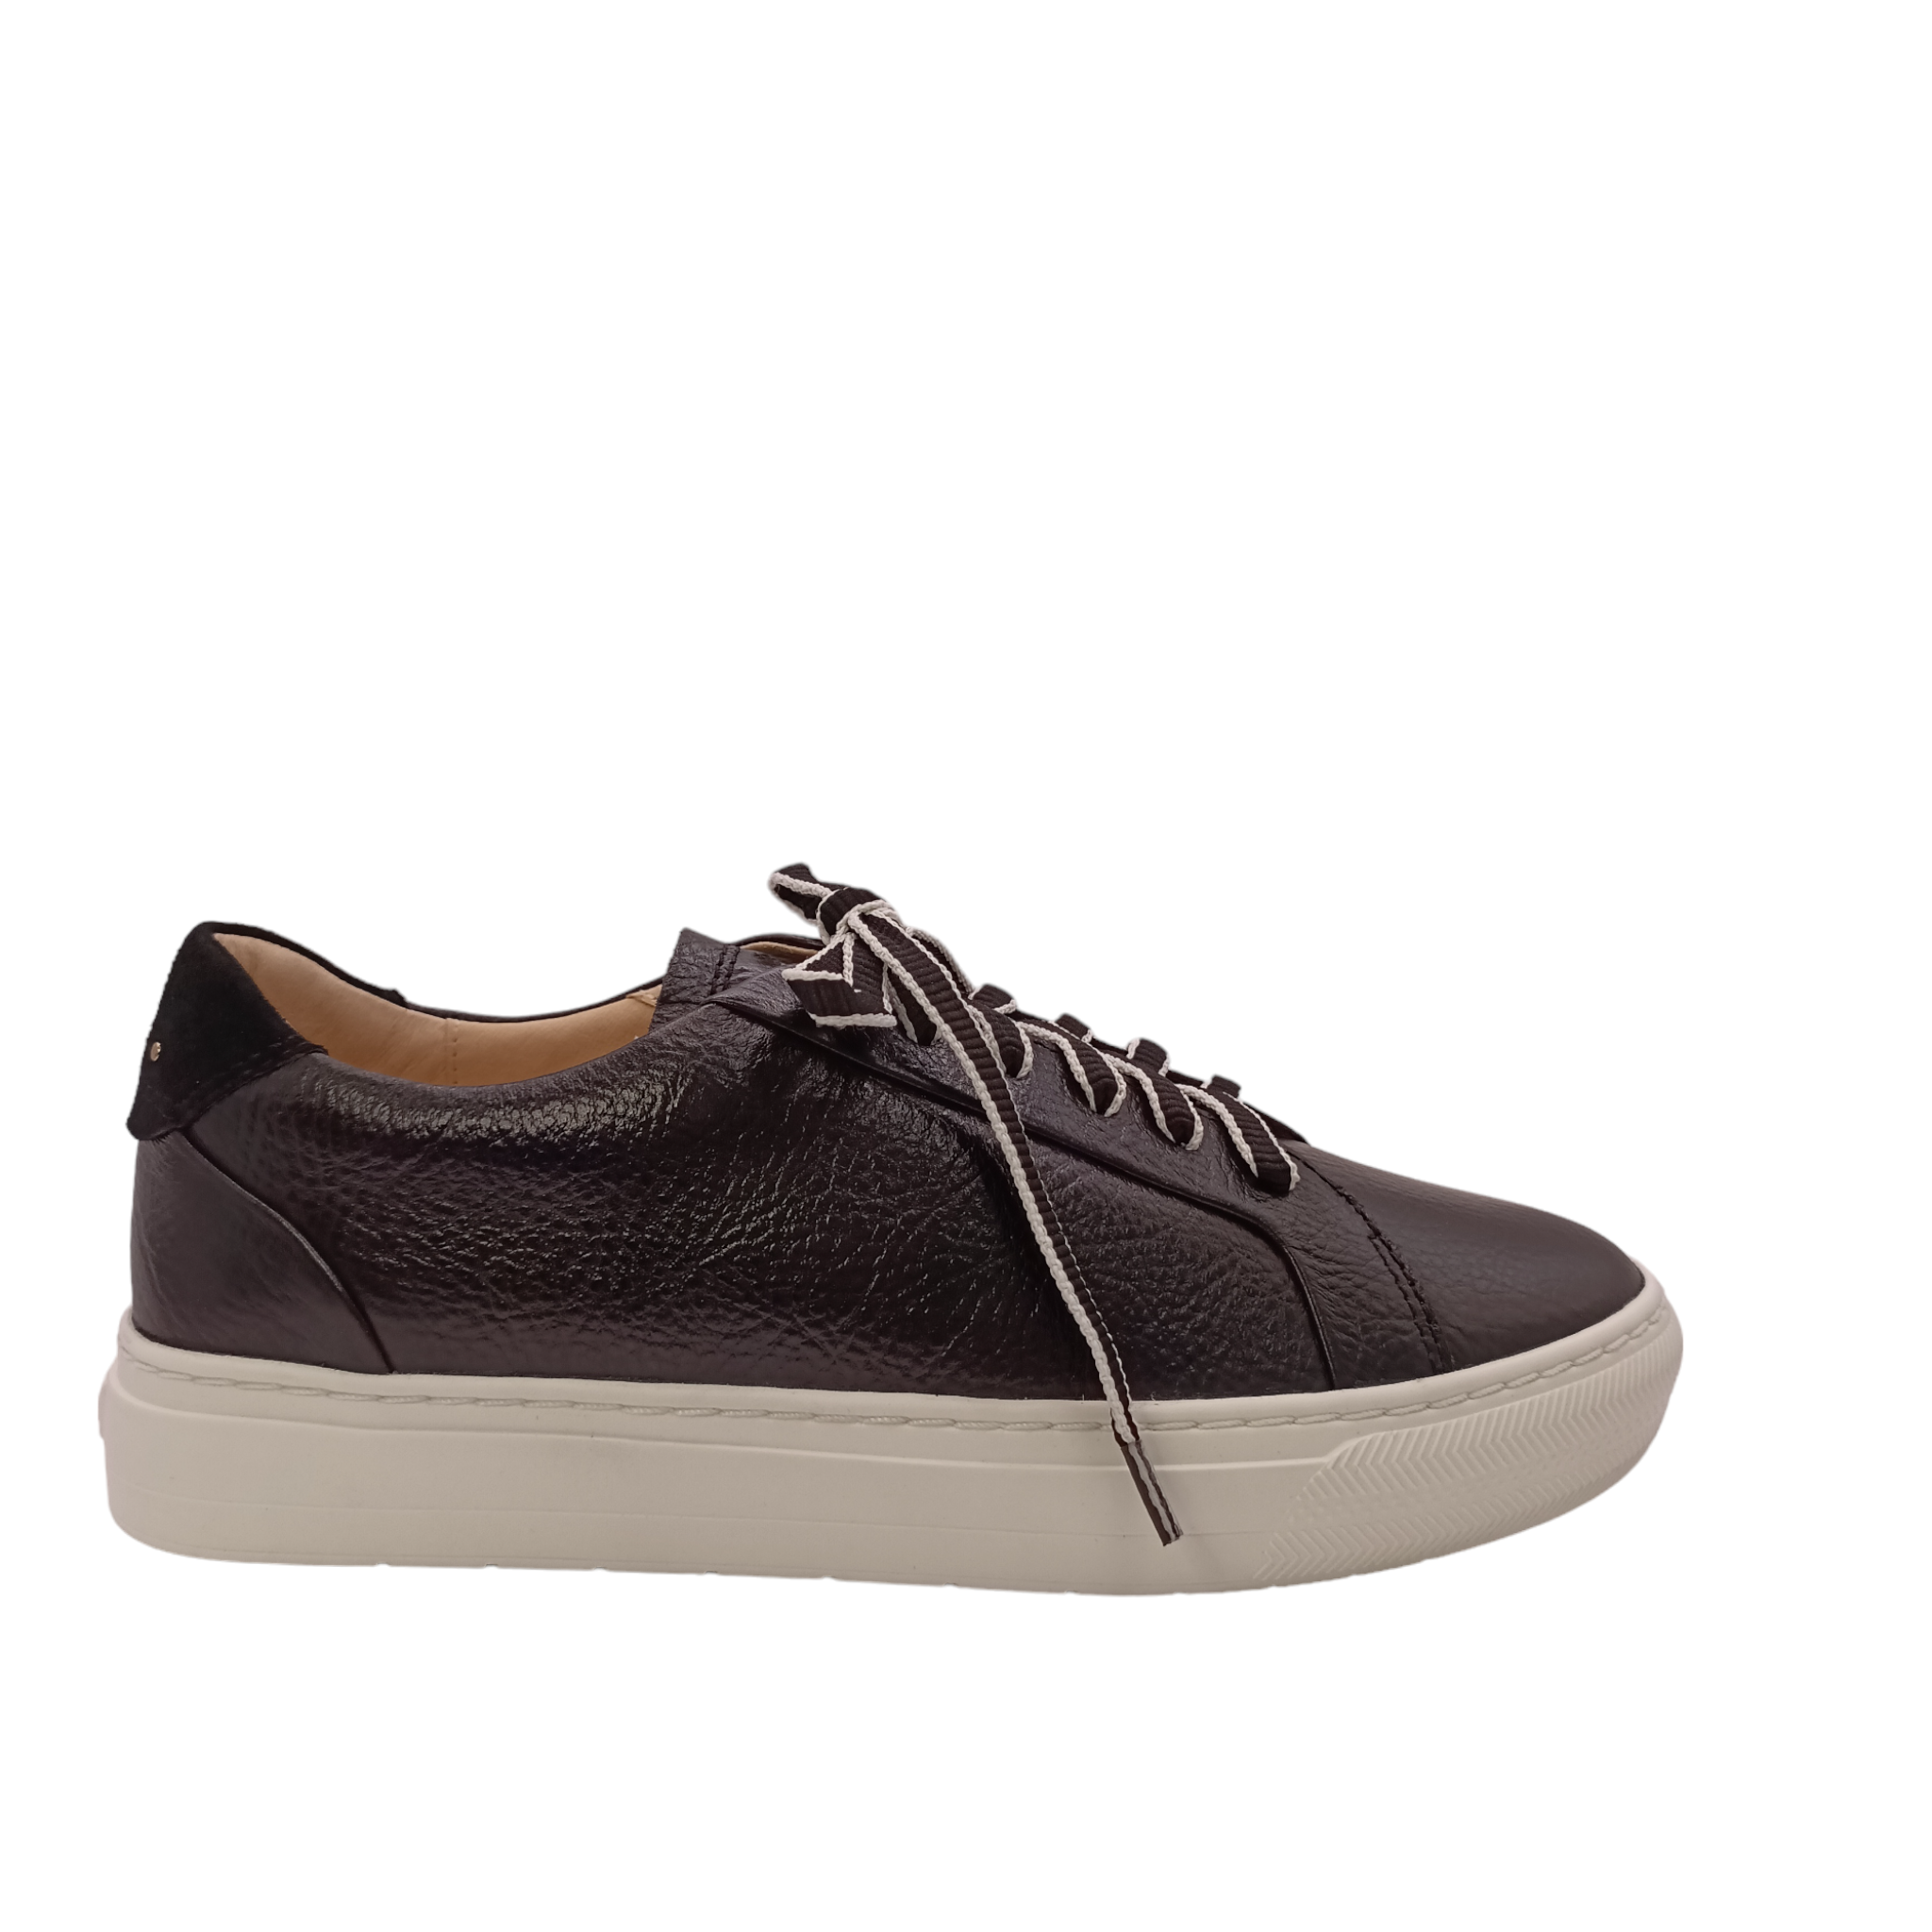 side view of Womens Frankie4 Black tumbled leather shoe with bright white sole and black laces with white edges. Shop Womens comfy and supportive sneakers, designed by podiatrists